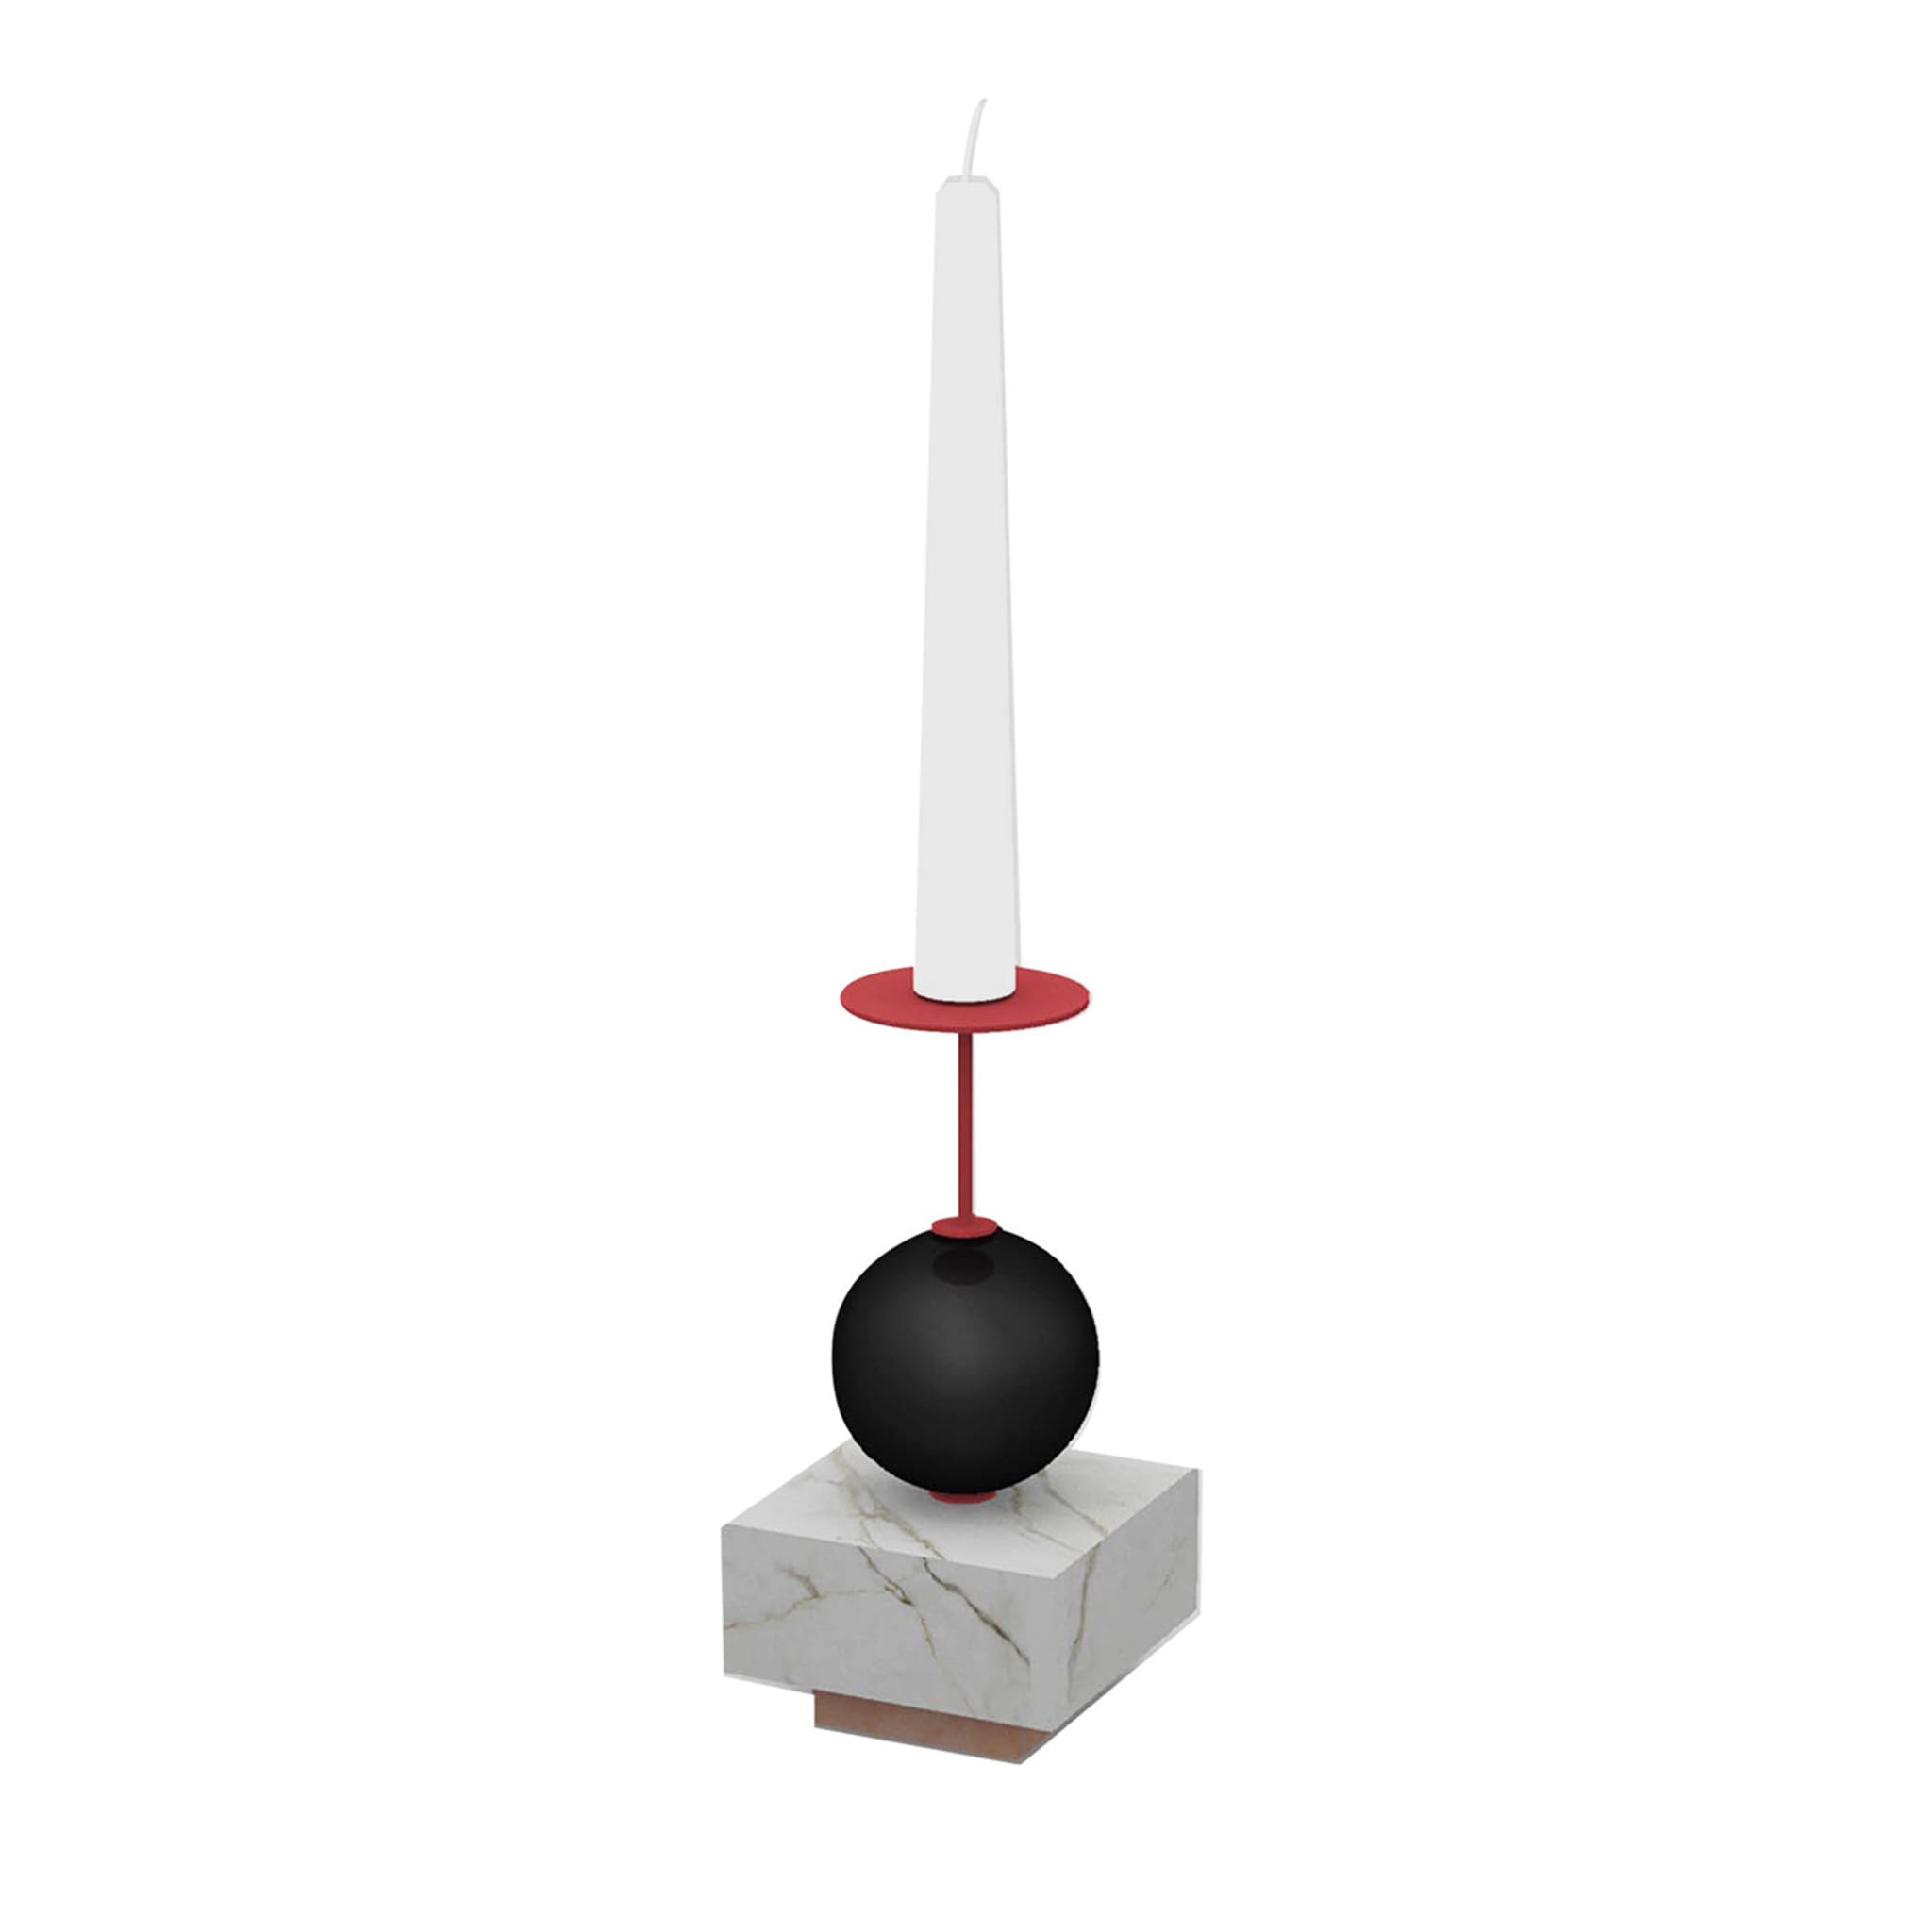 Raccontami White Carrara, Black and Red Candle Holder - Main view